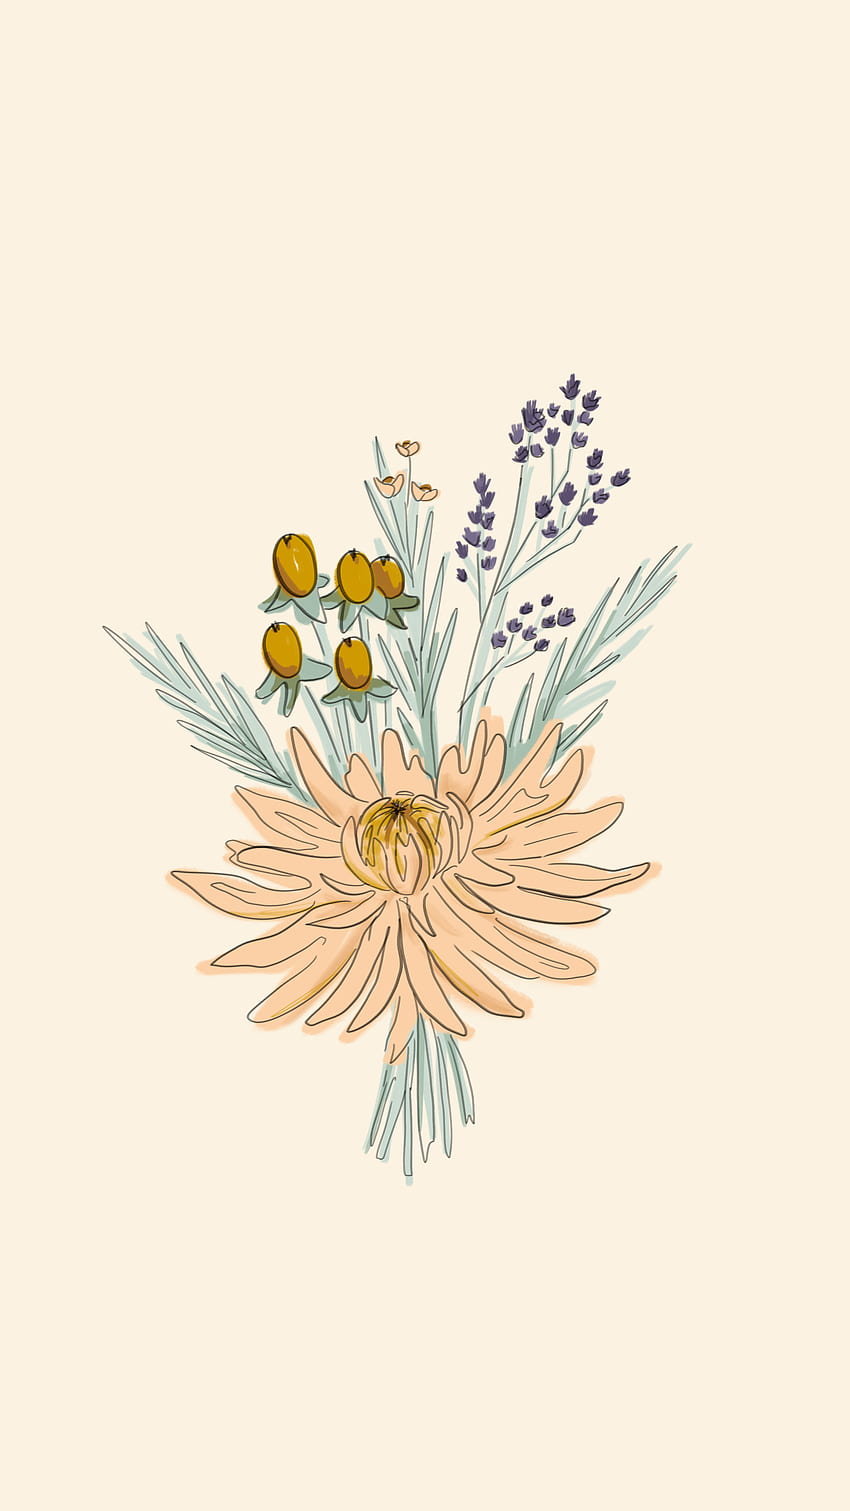 A drawing of a bouquet of flowers - May